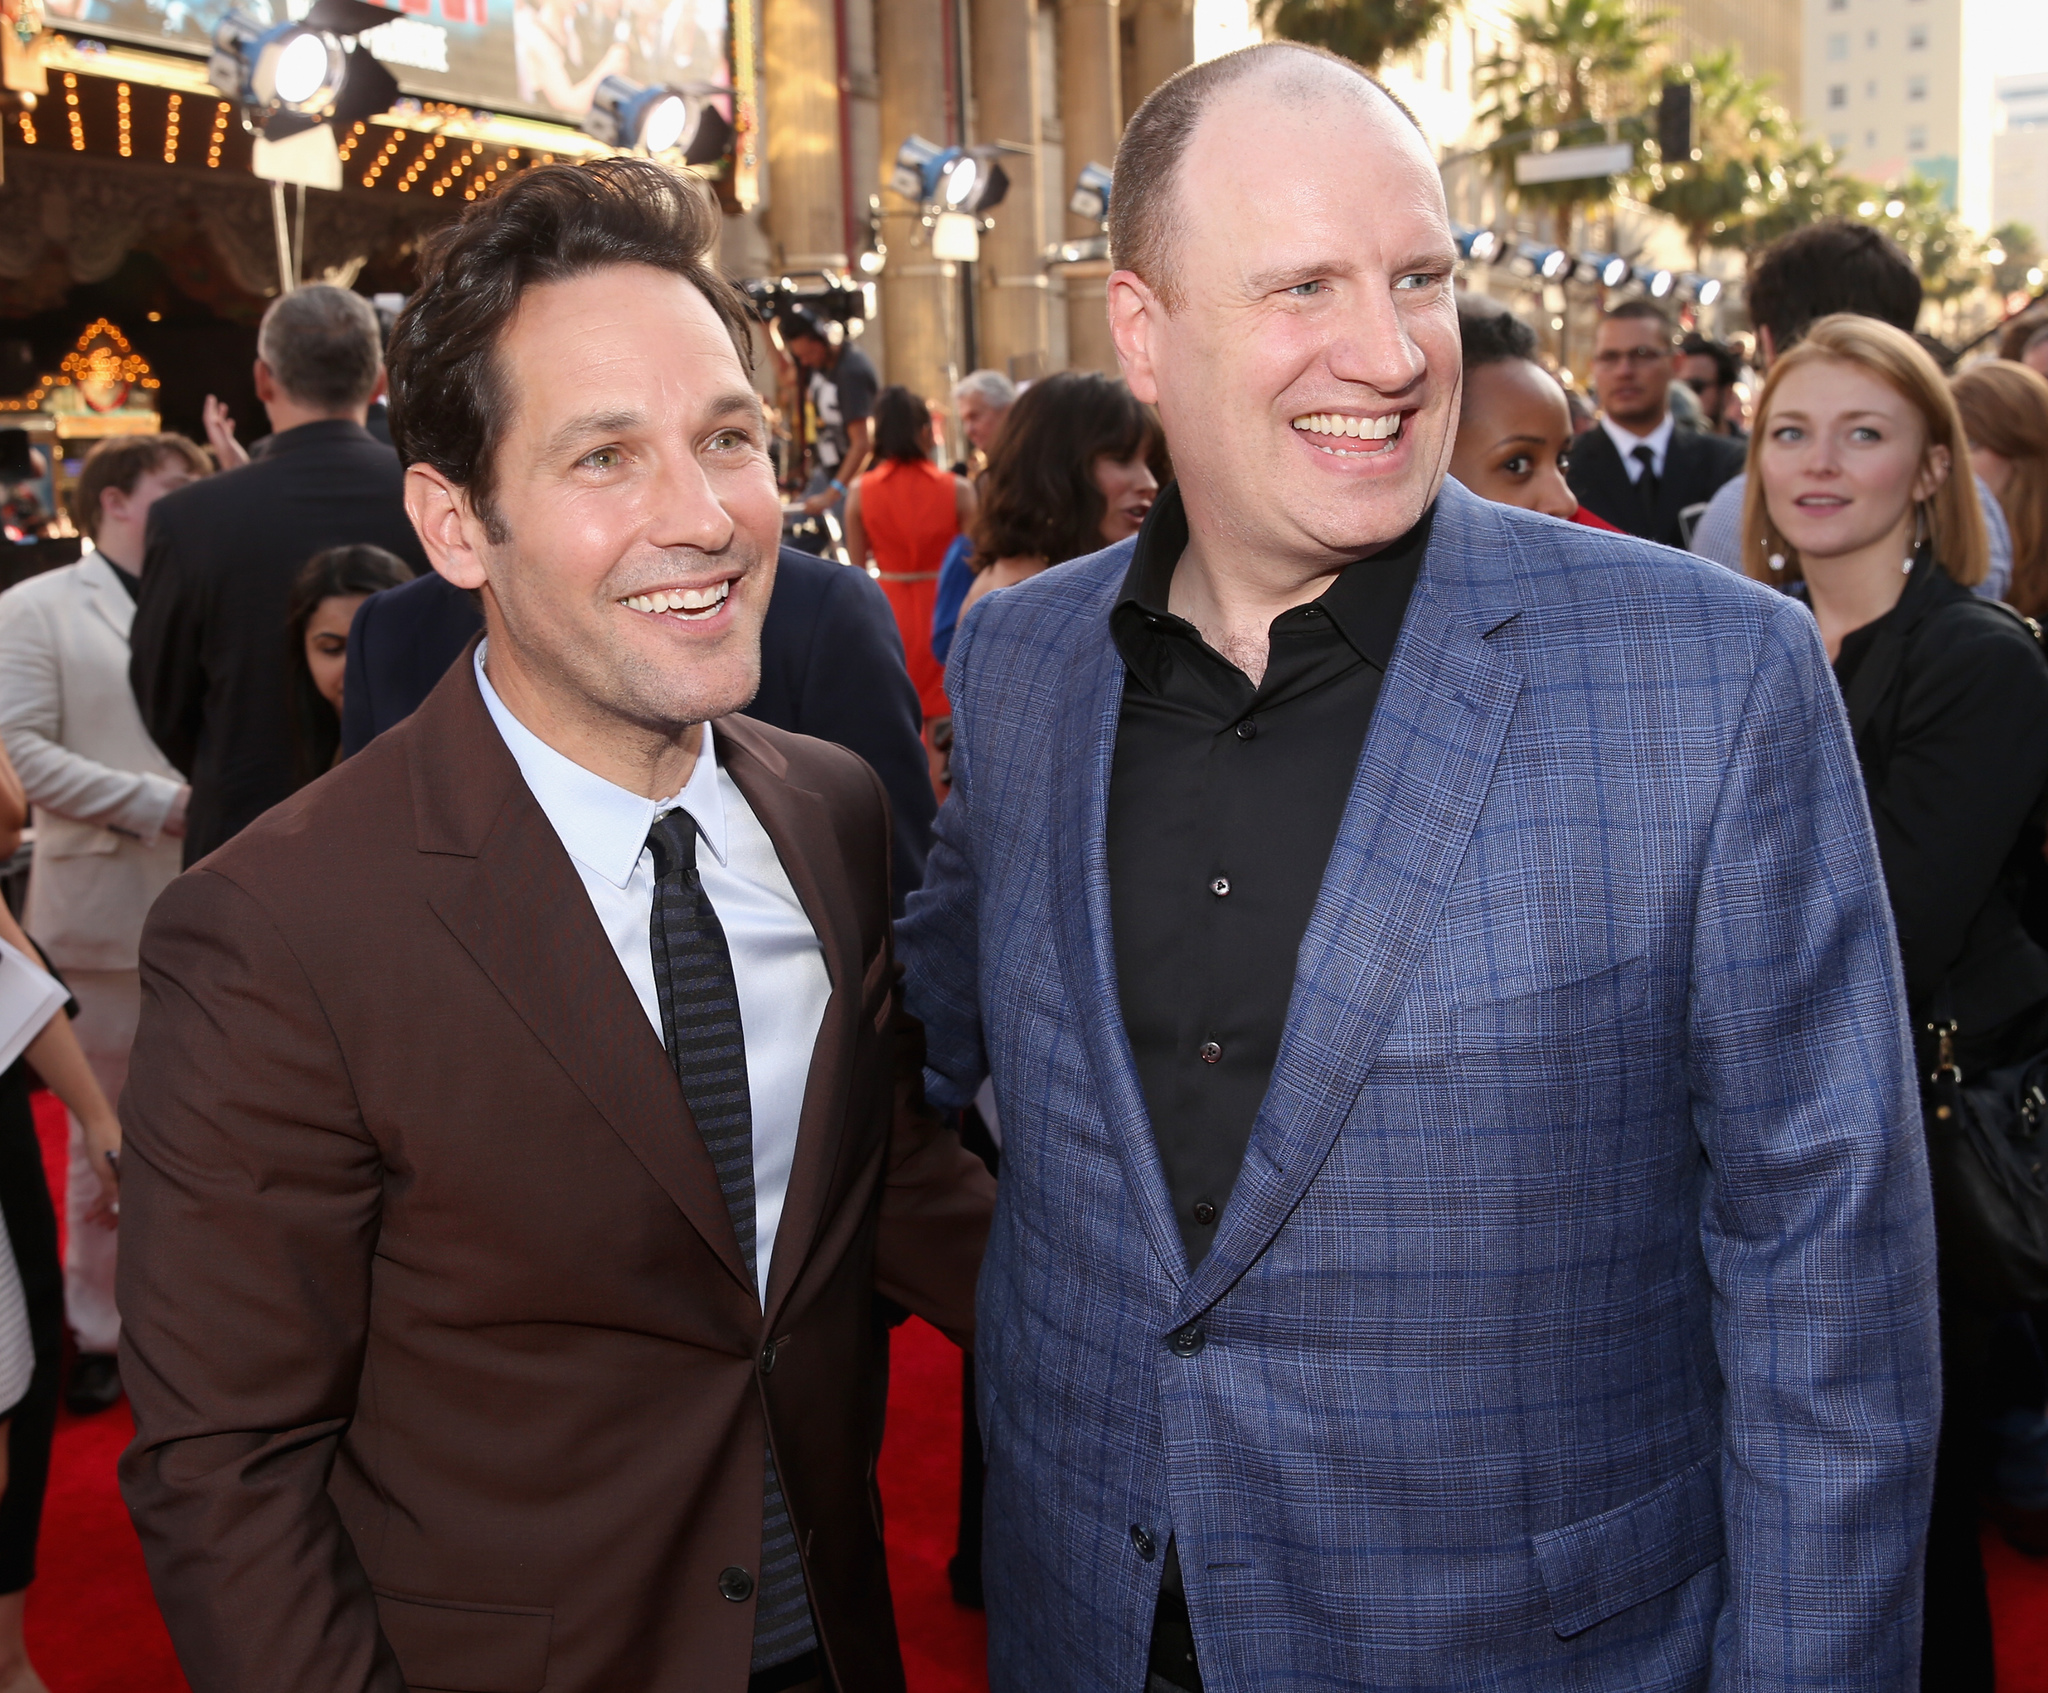 Kevin Feige and Paul Rudd